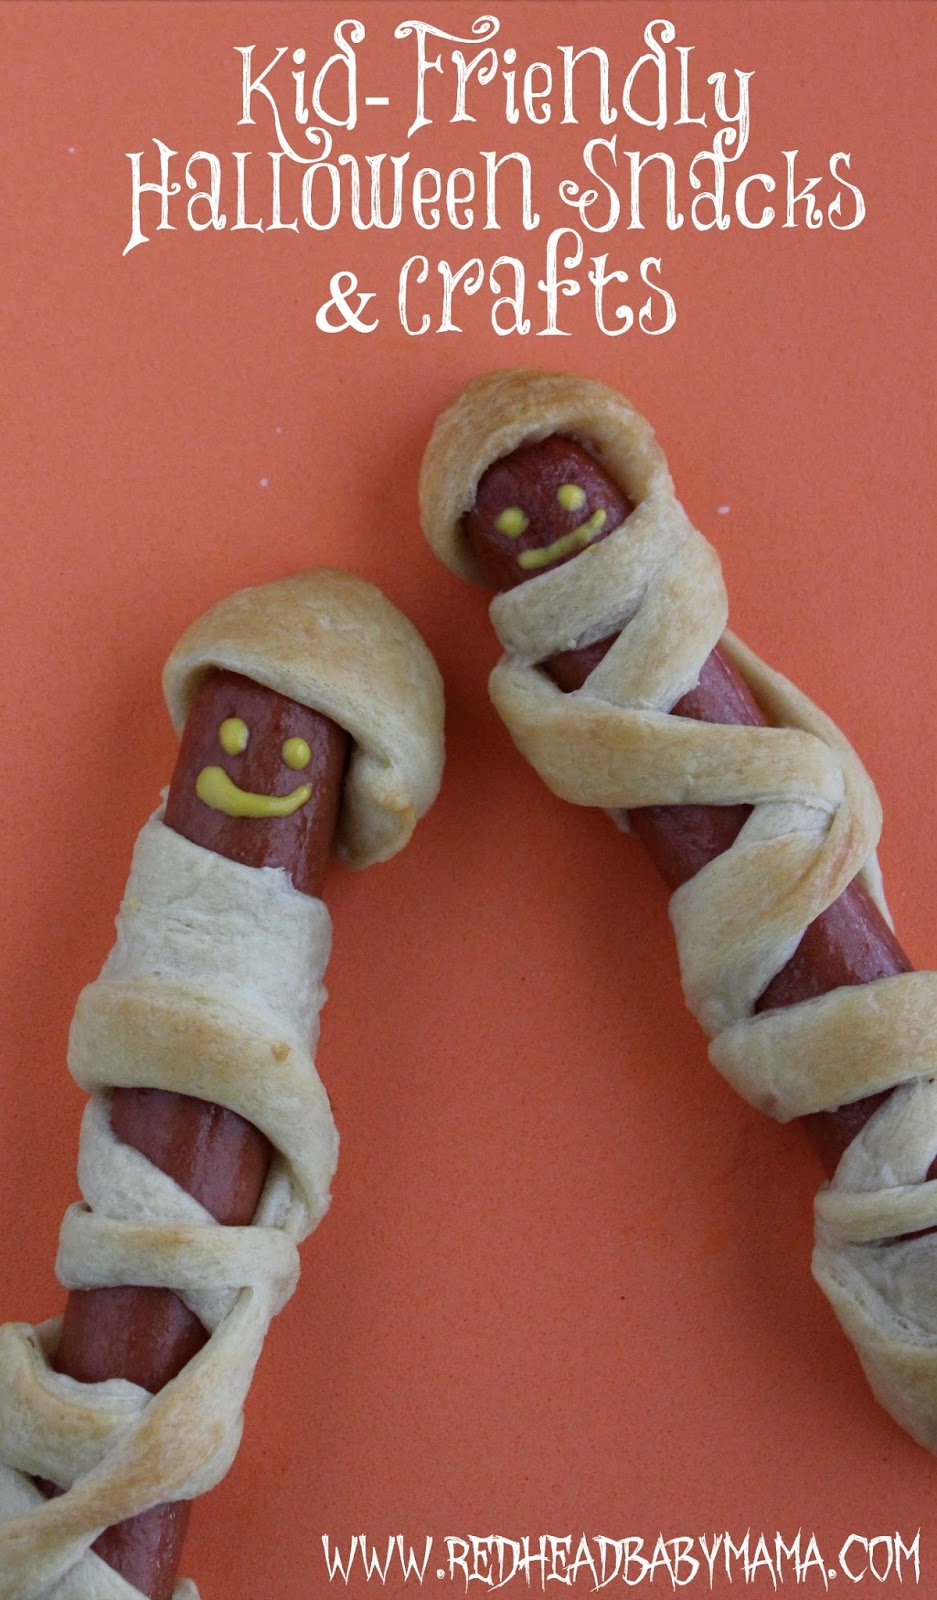 Kid Friendly Halloween Snacks and Crafts: includes Mummy Dogs, Ghost Pops and Shrieking Pretzels